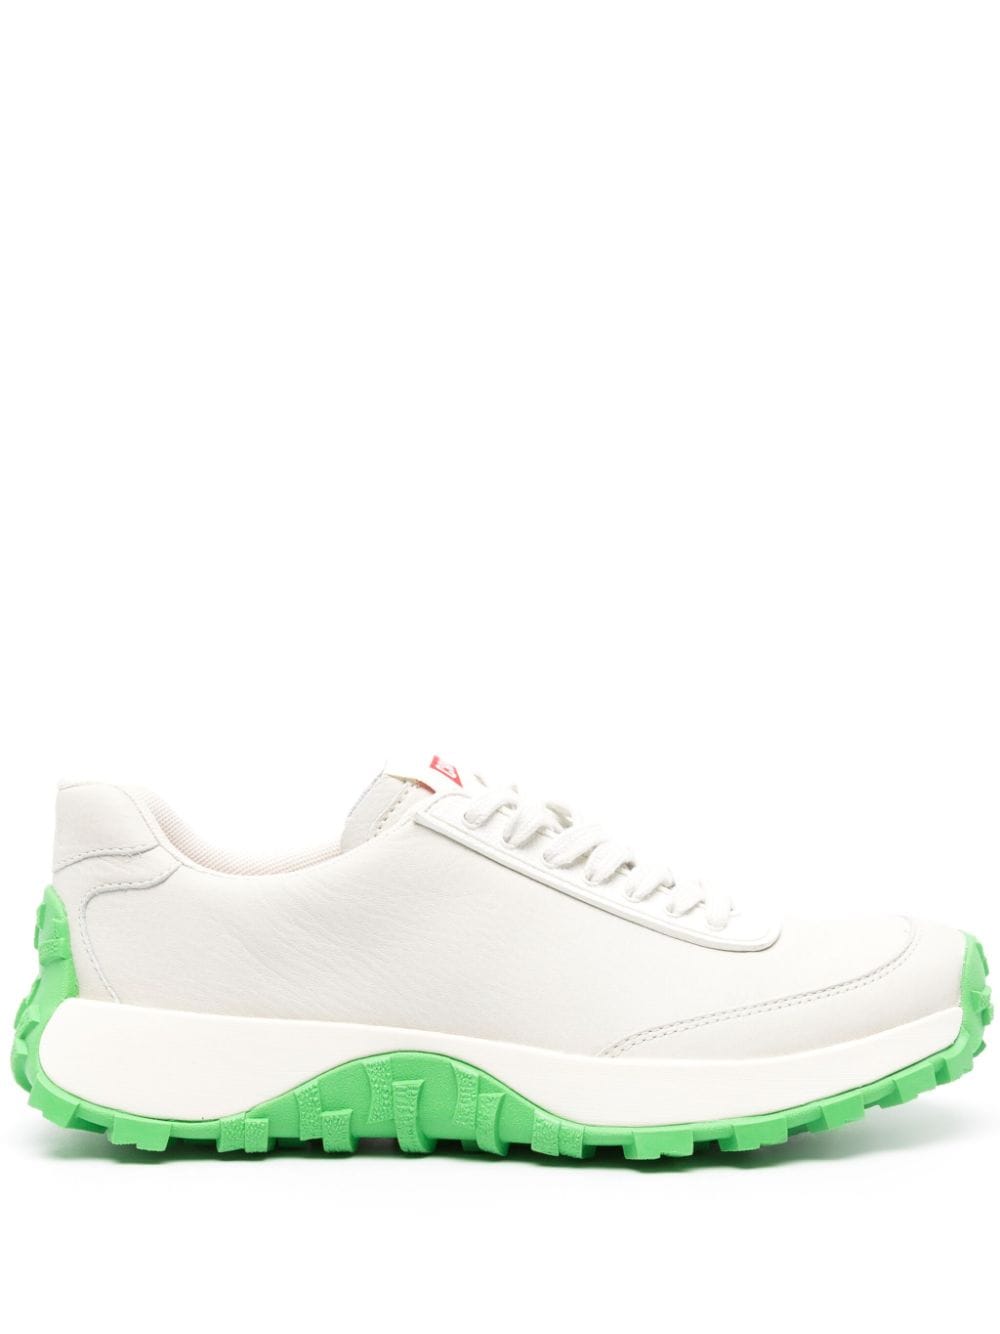 Camper Drift Trail Leather Sneakers In White Natural